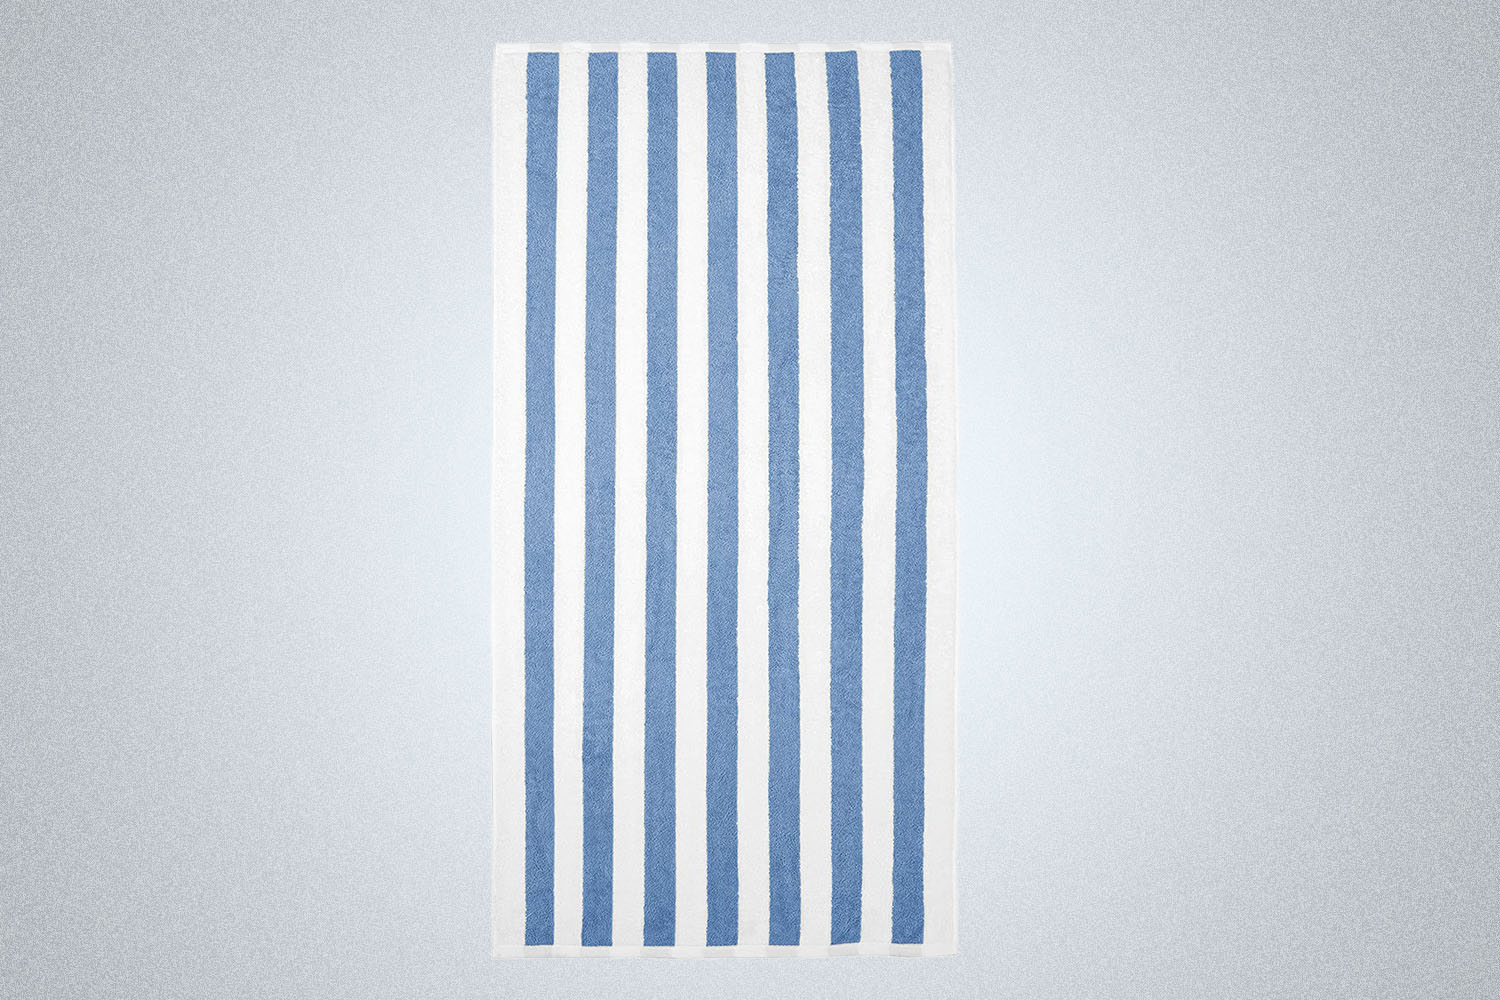 a white and blue striped beach towel from Amazon on a grey background